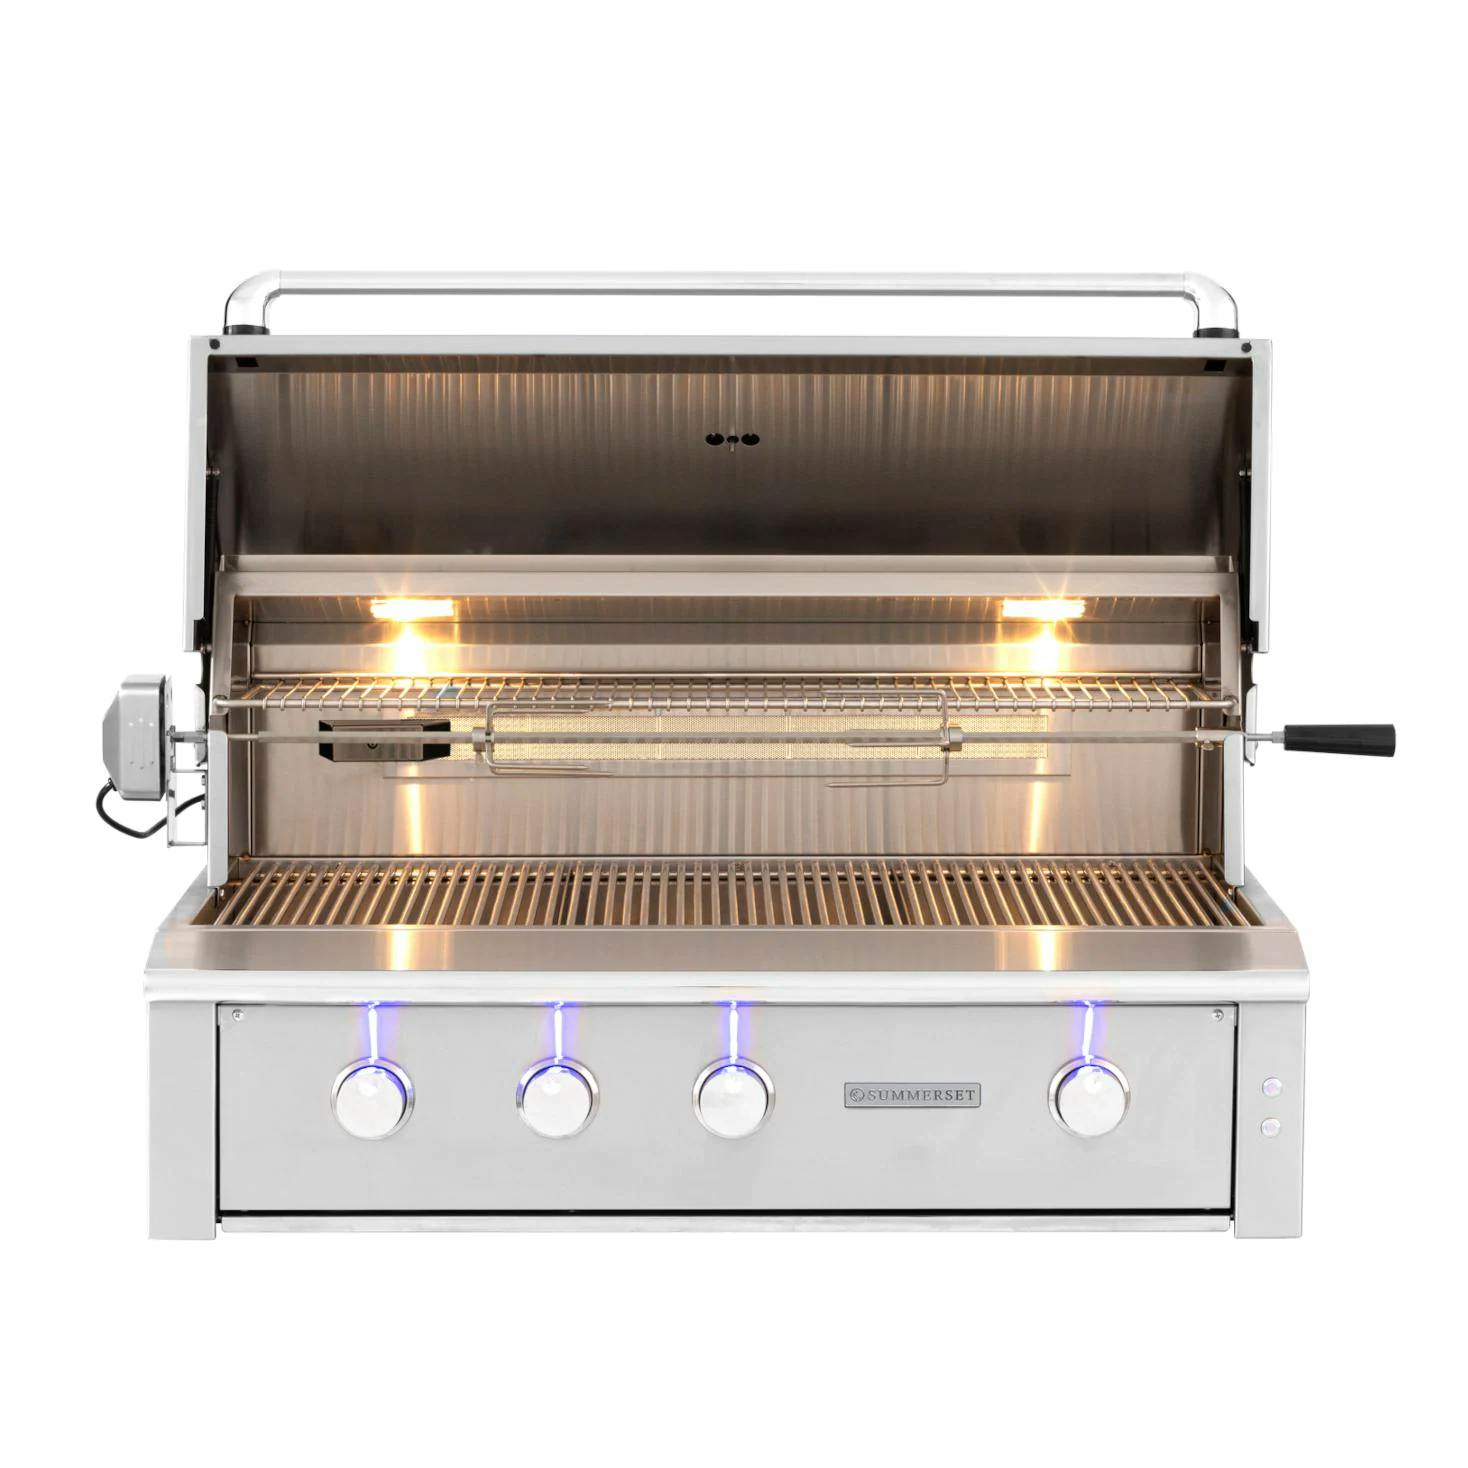 Summerset Alturi Built-in Gas Grill with Stainless Steel Burners and Rotisserie